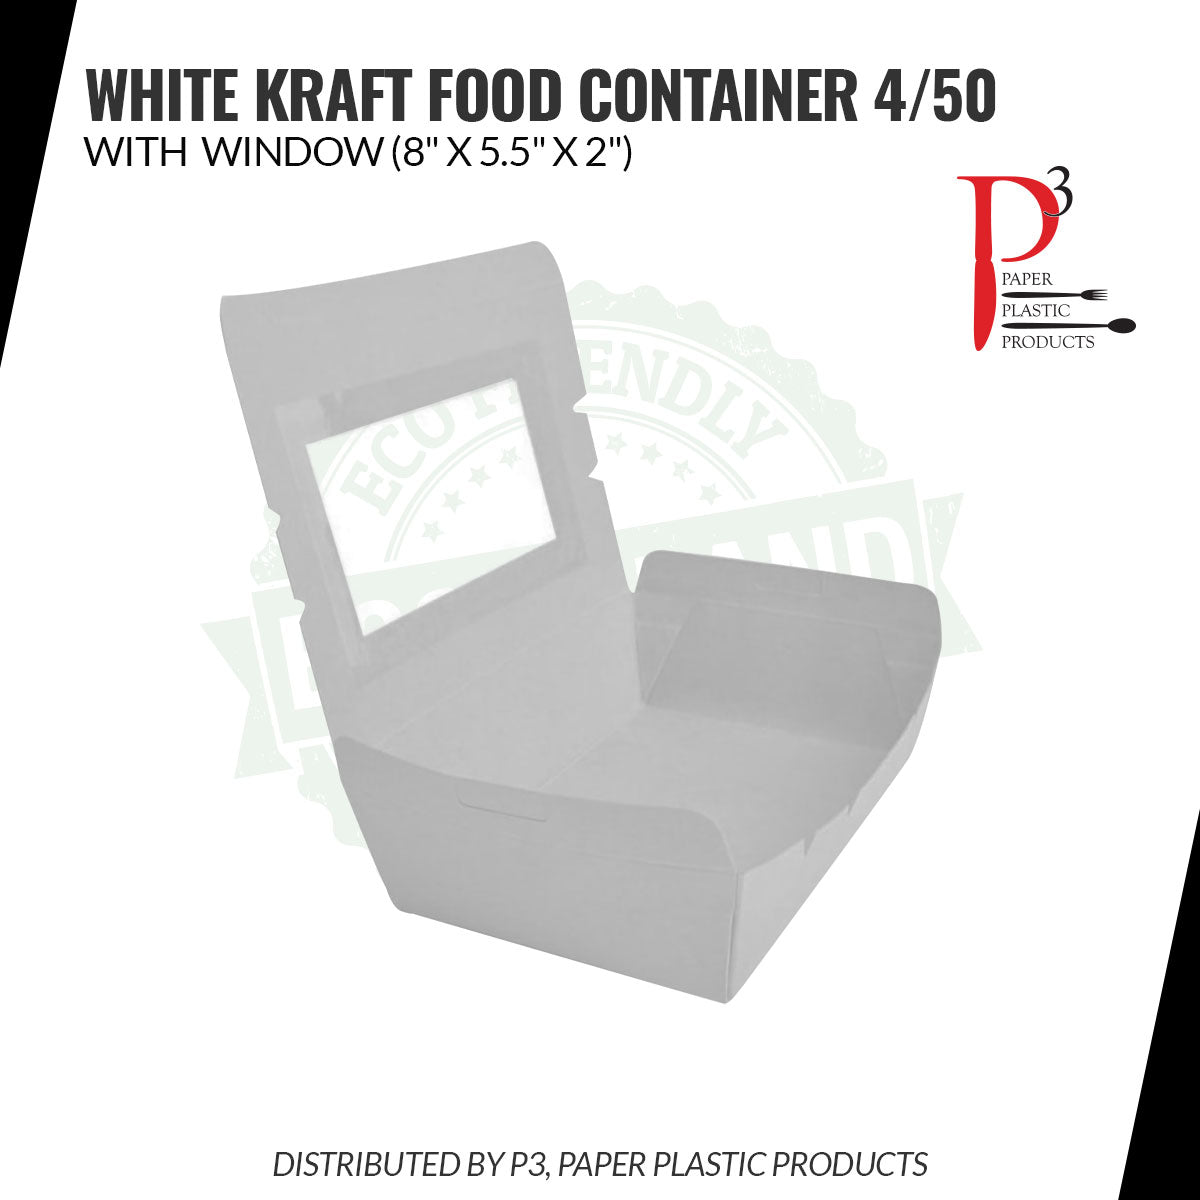 Kraft Food Container White with window 8